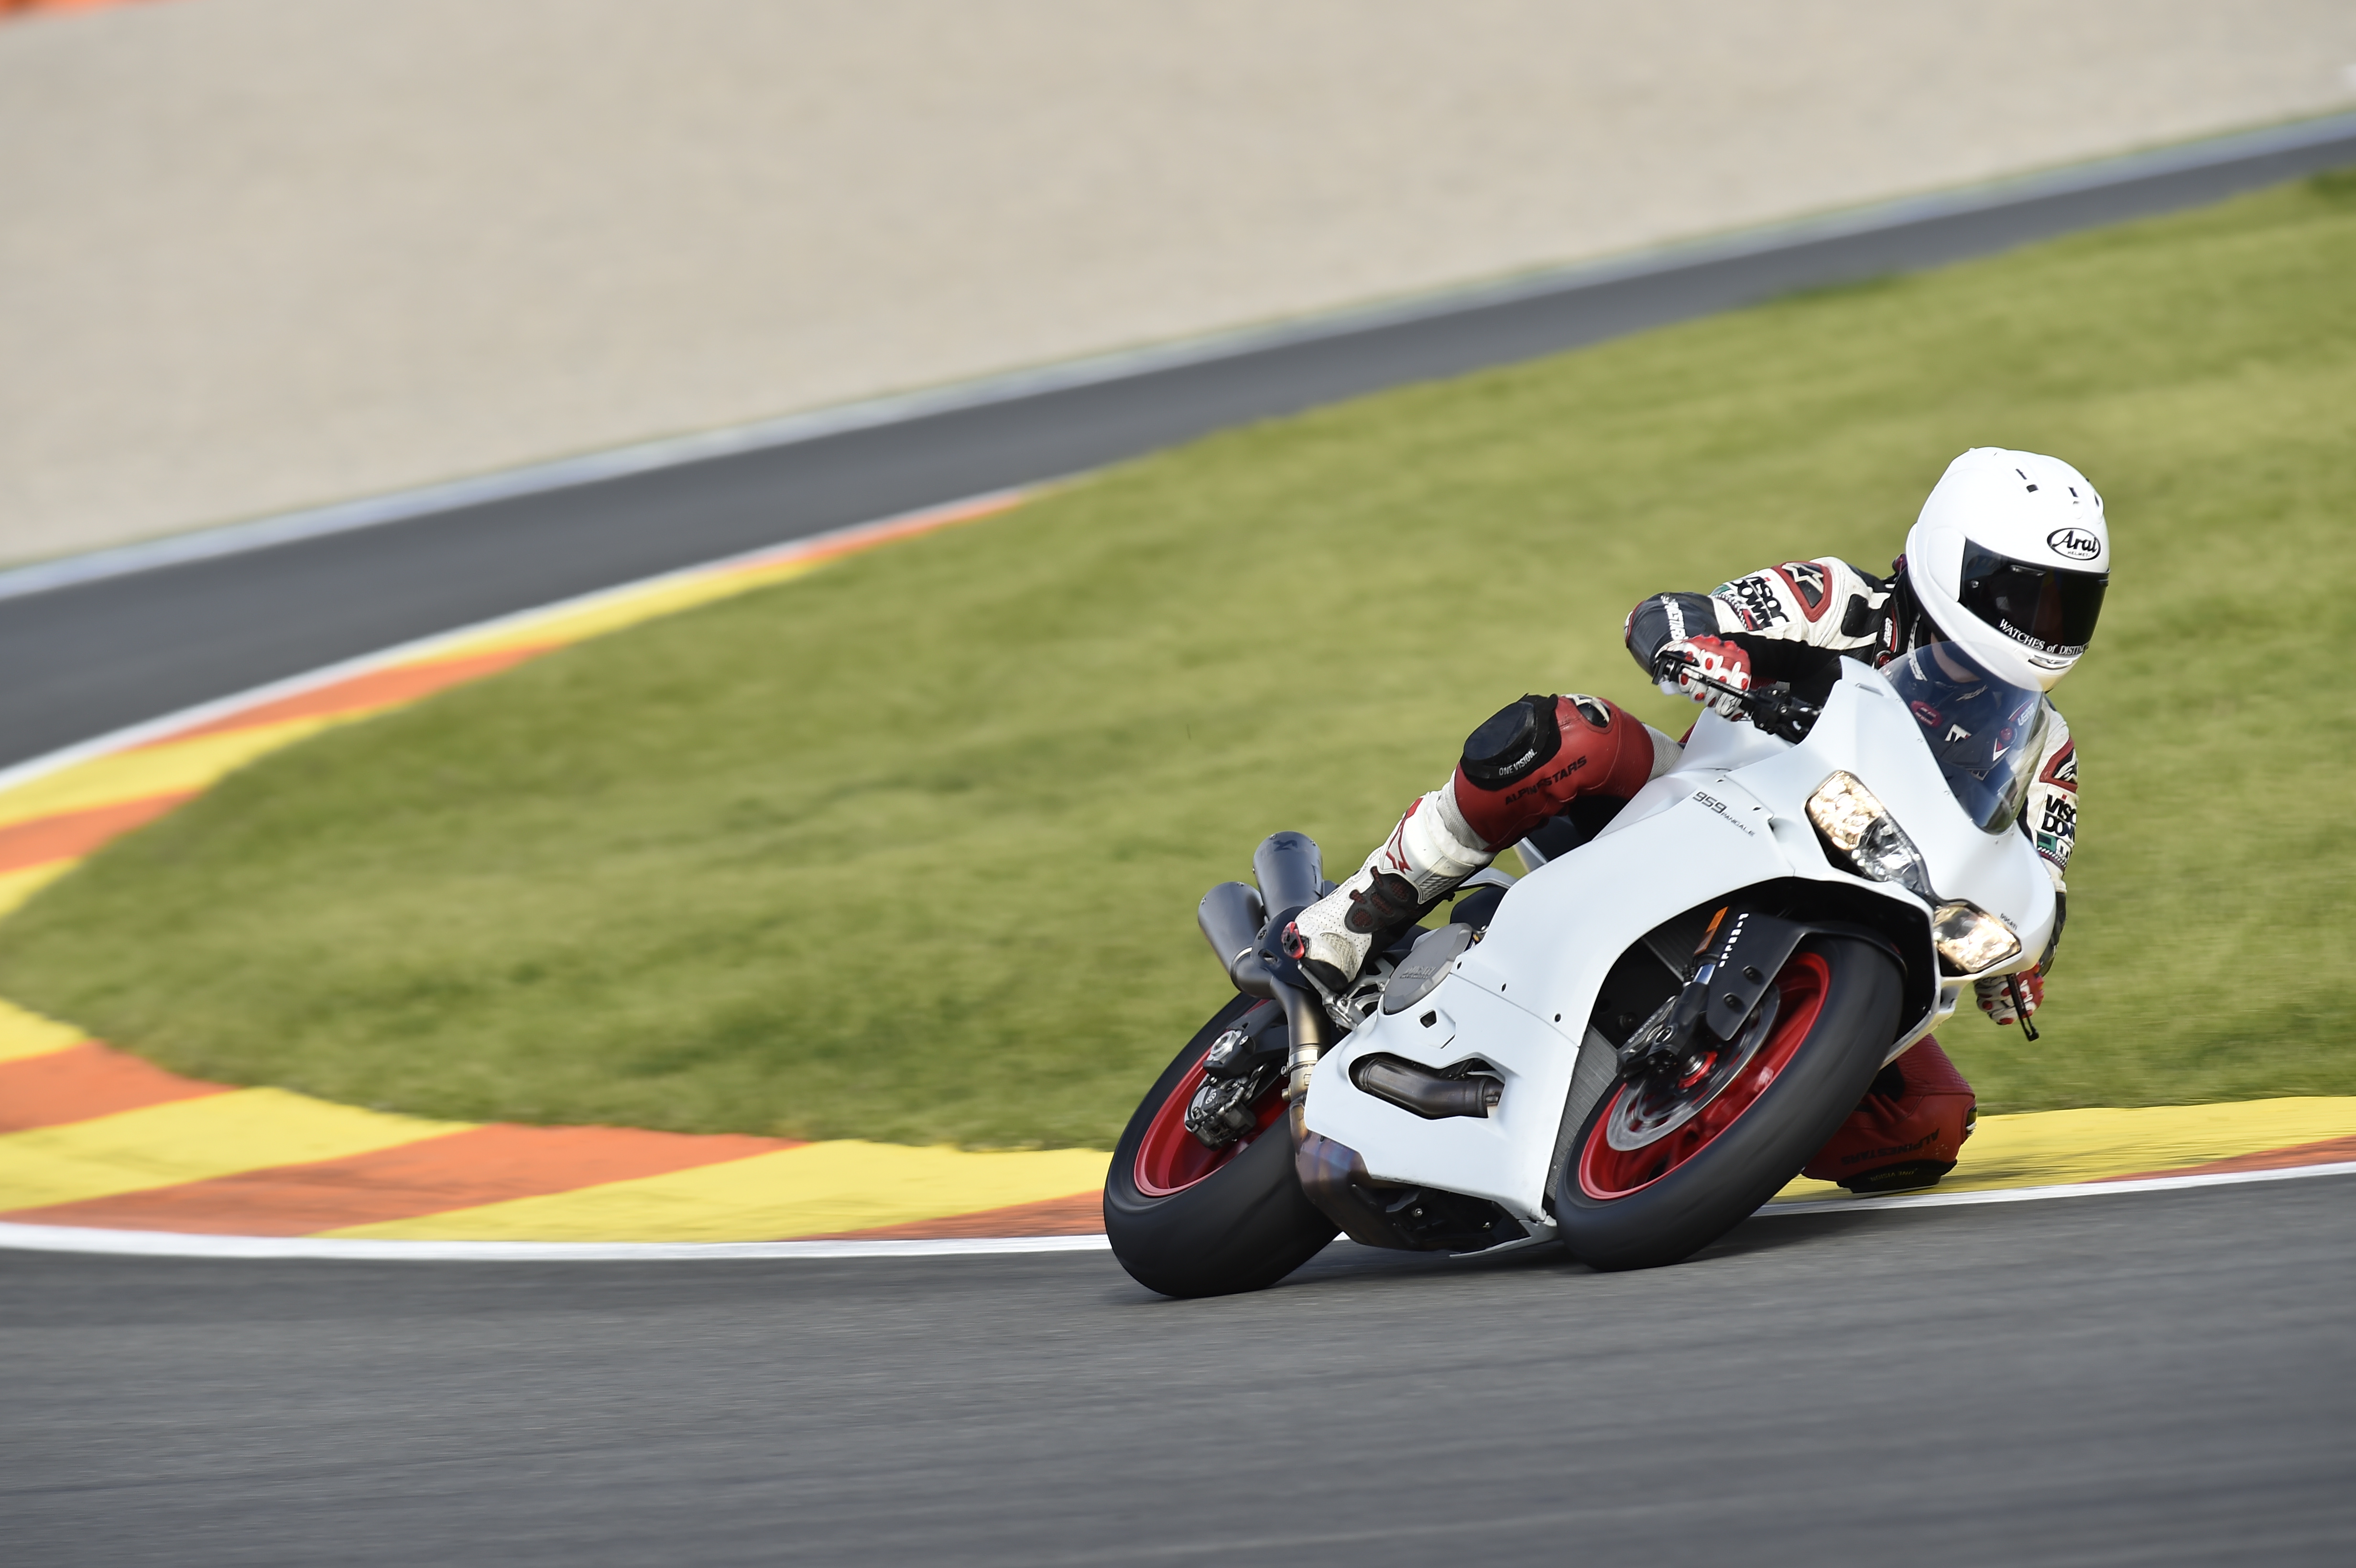 First ride: Ducati 959 Panigale review